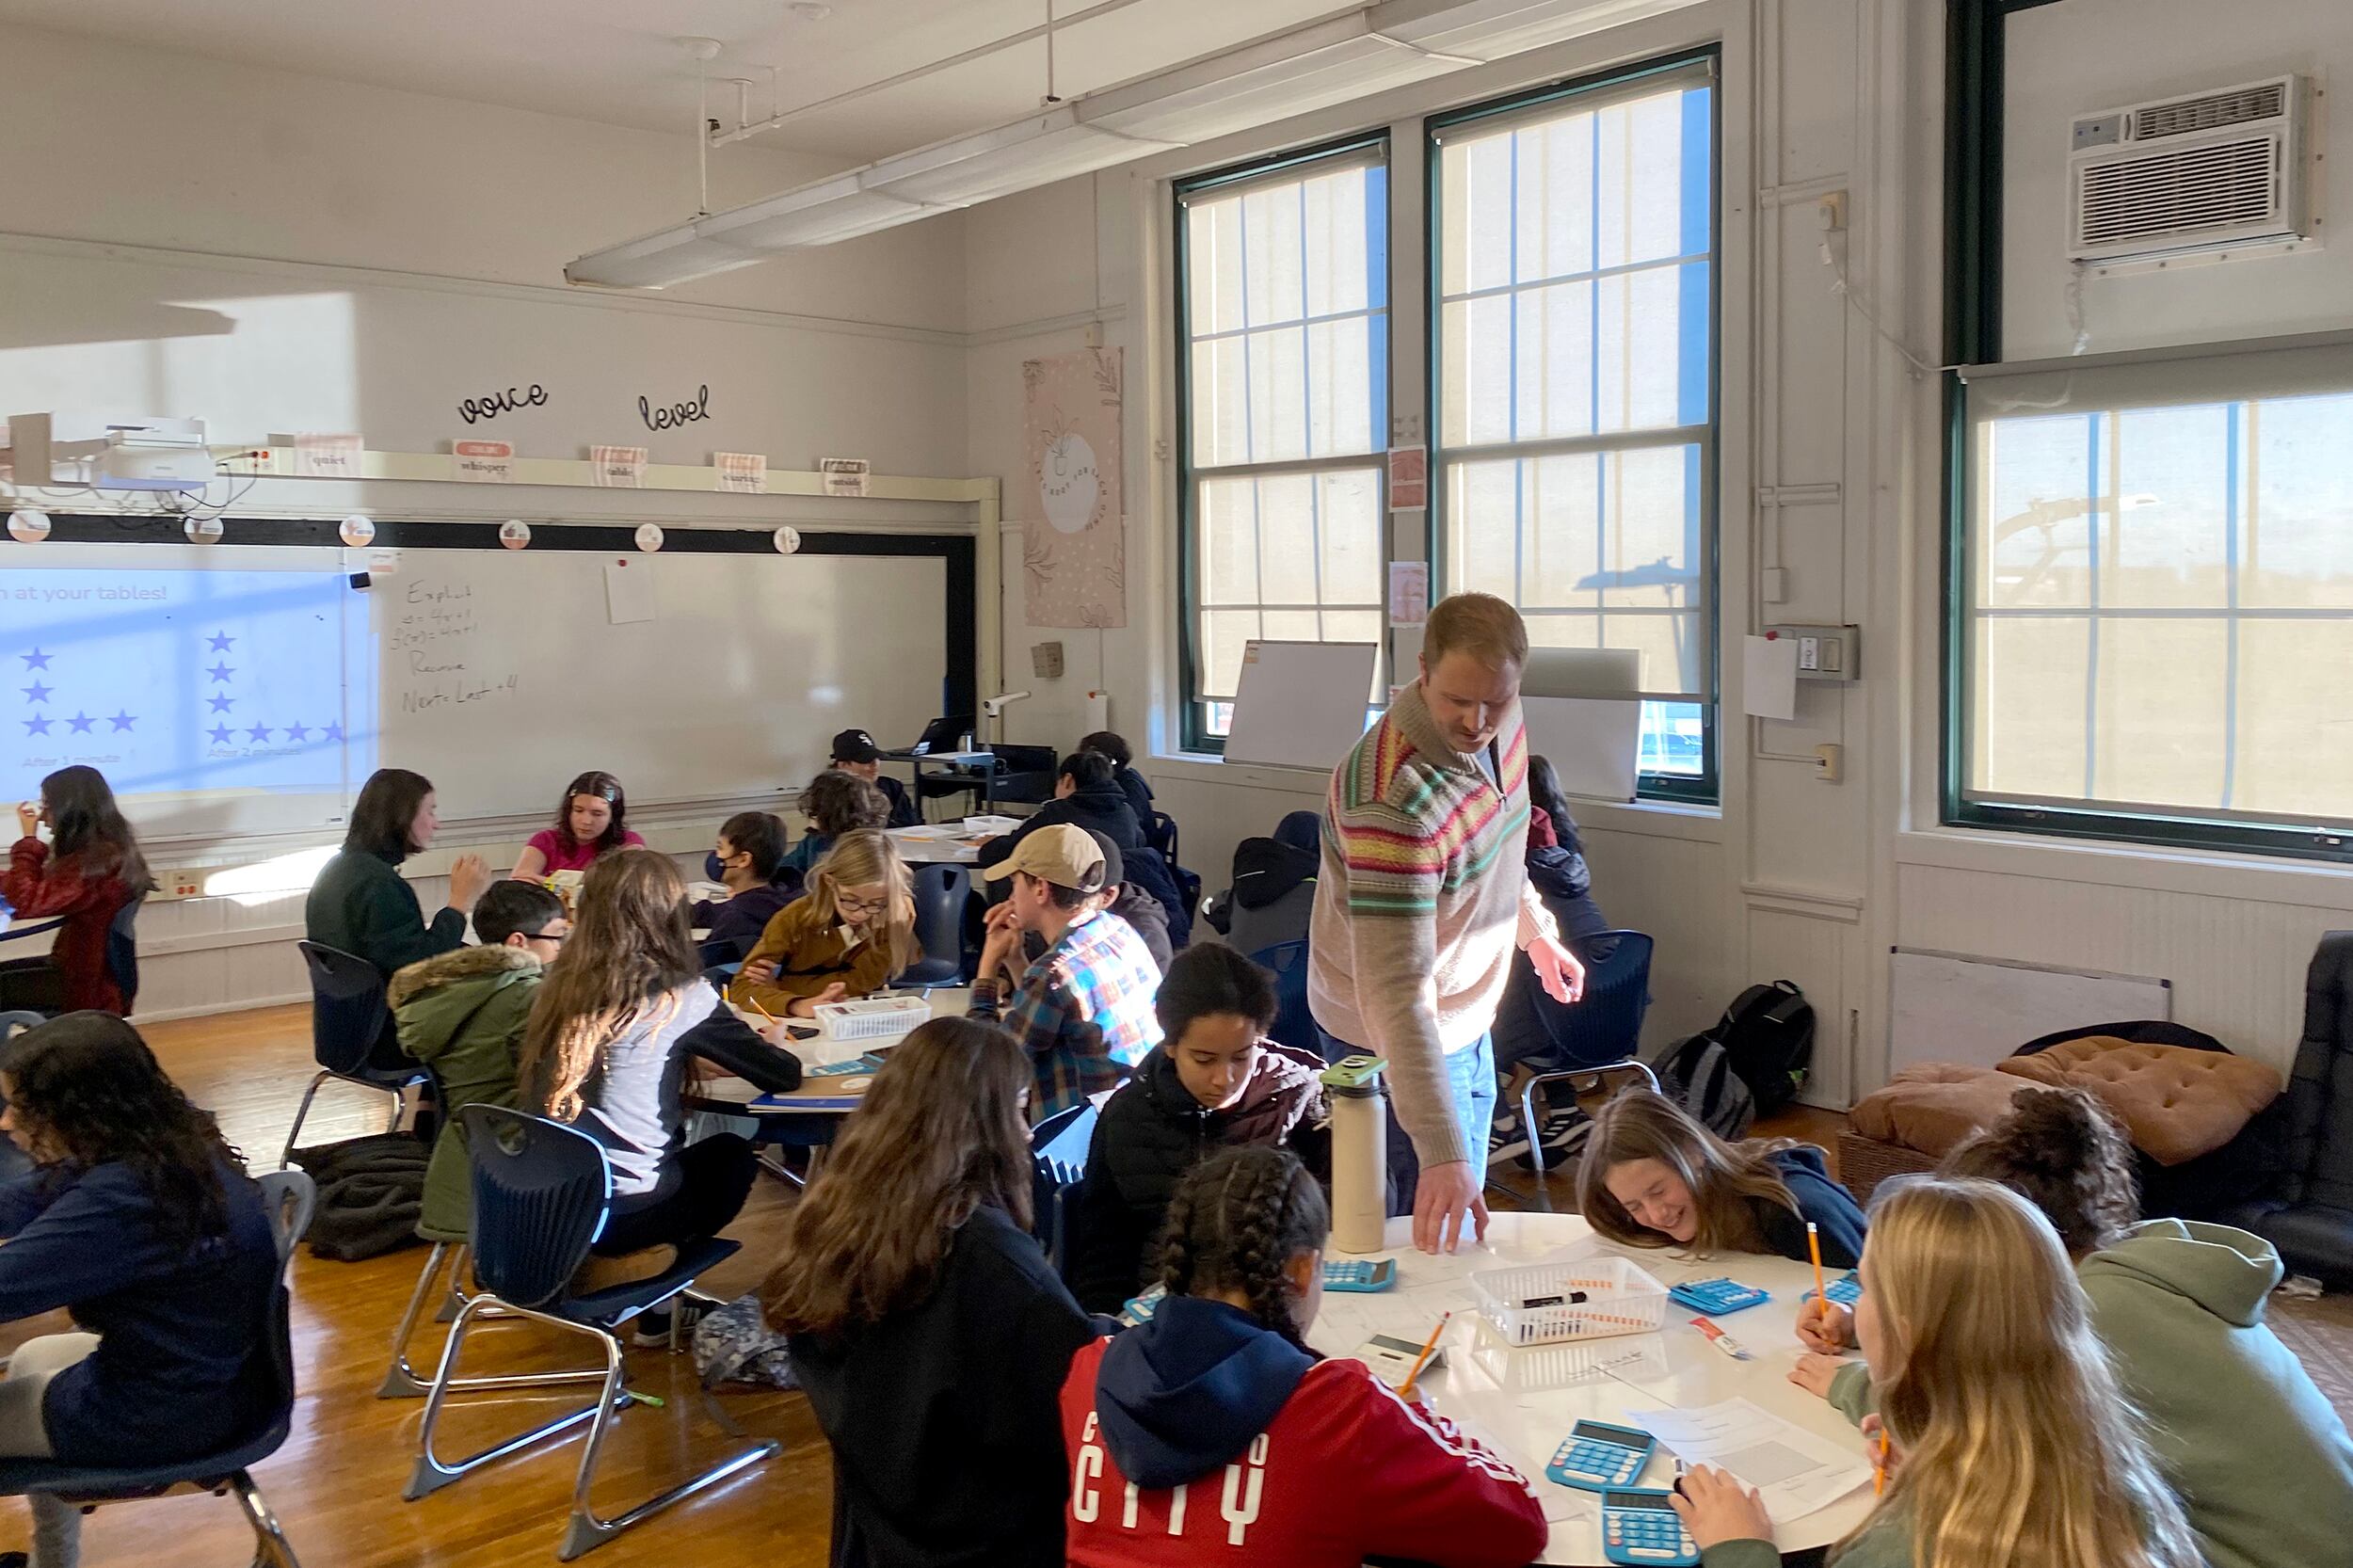 An adult teacher stands while a large group of students sit at their tables in a classroom with white walls in the background.